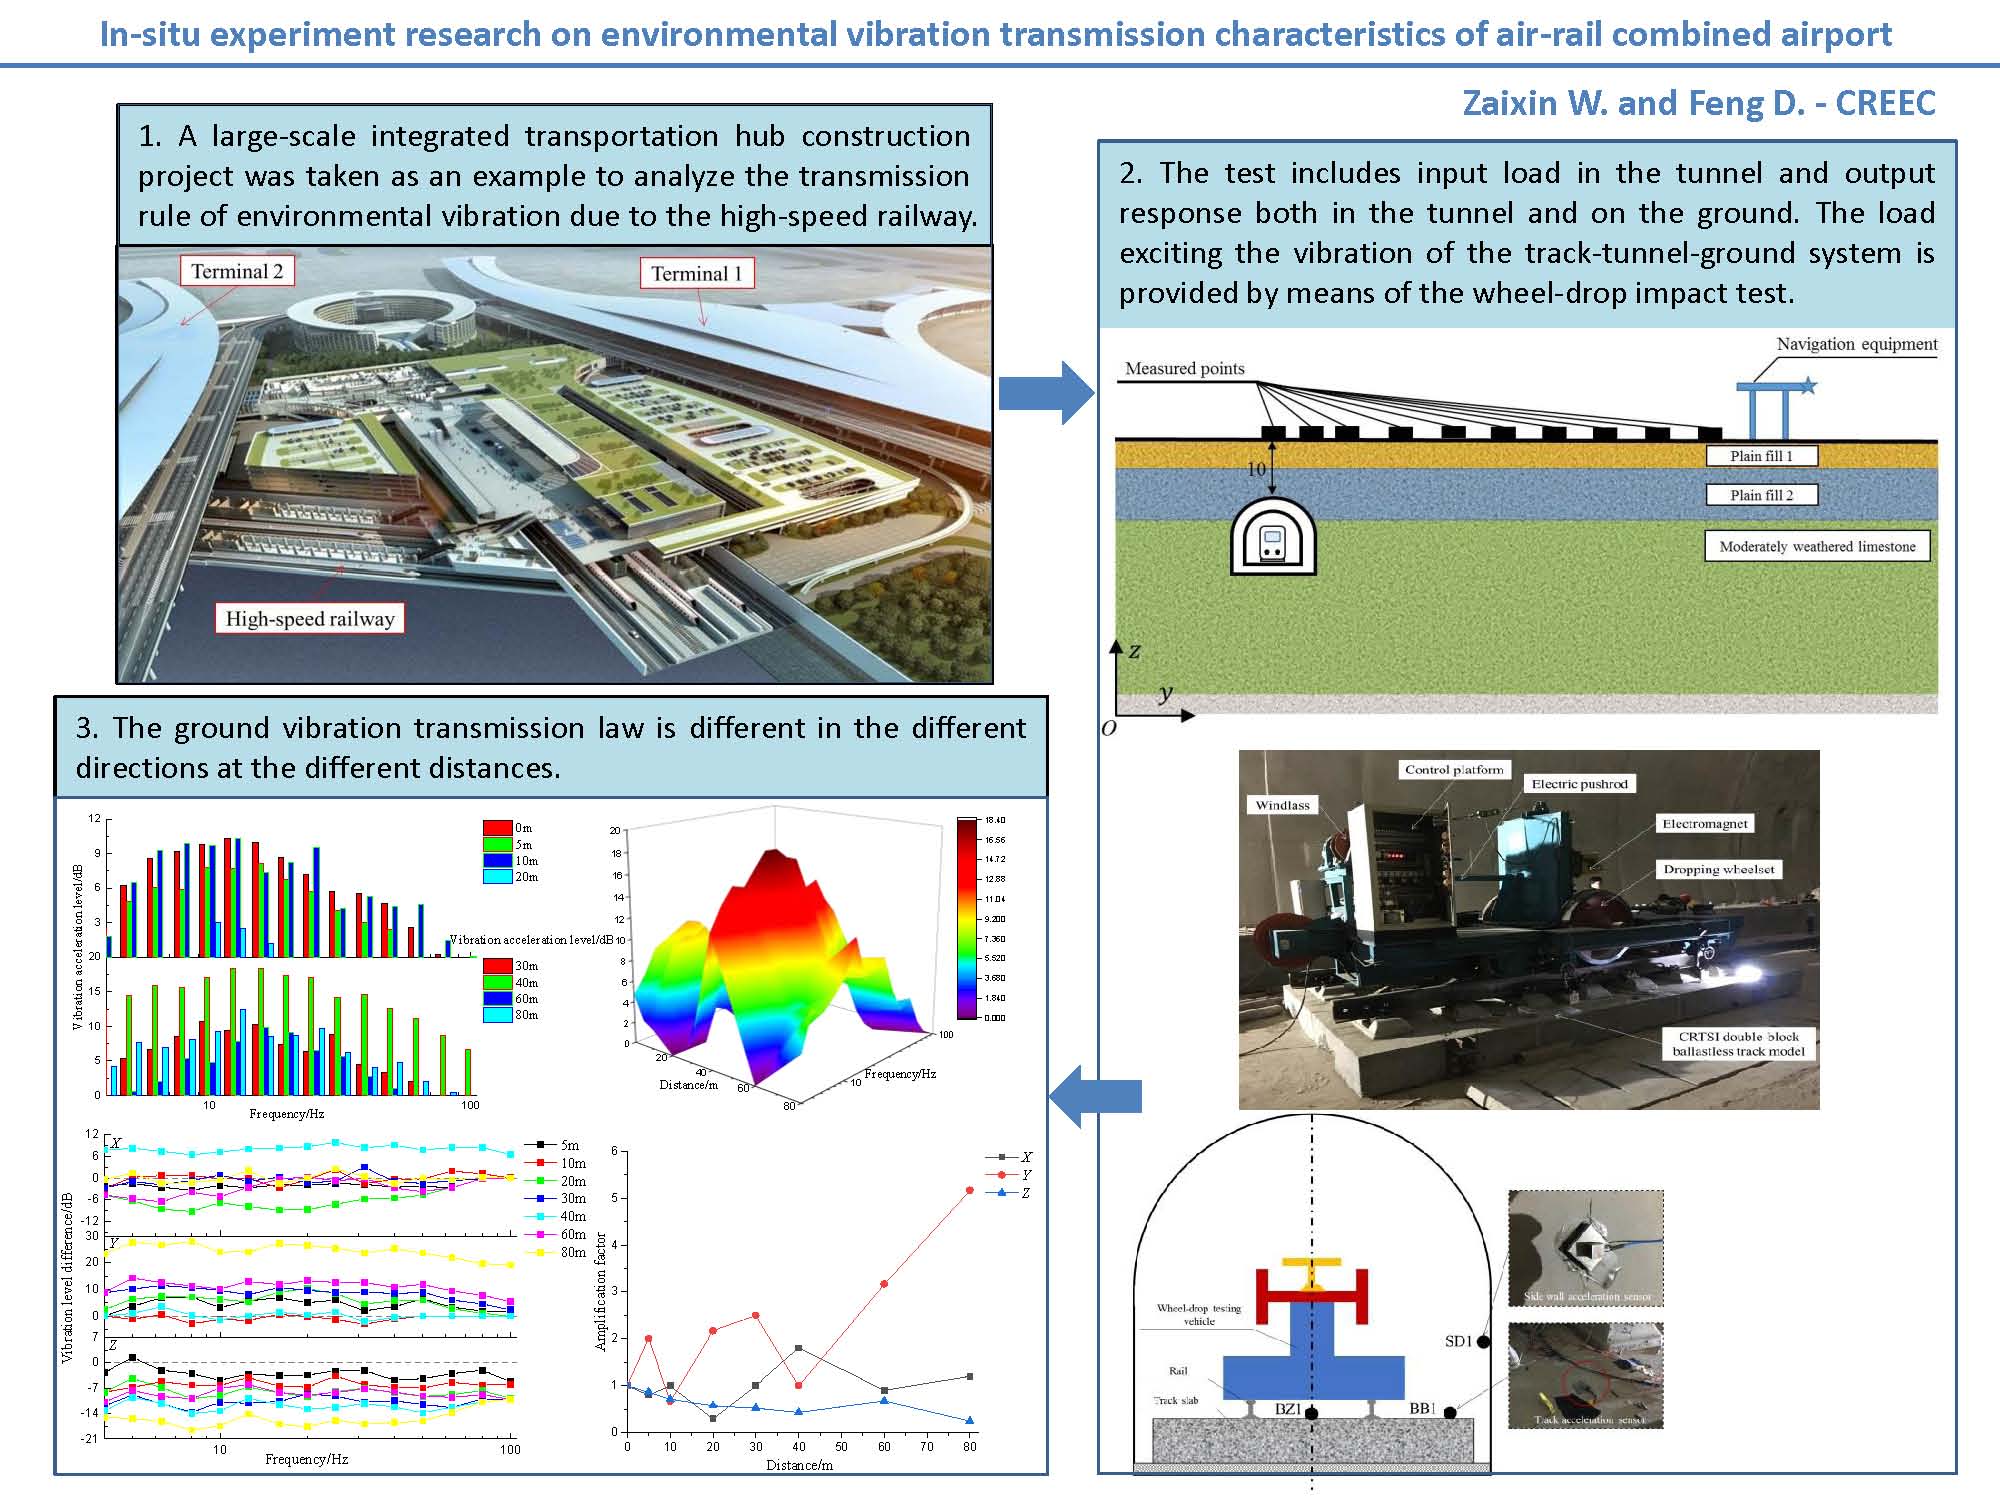 In-situ experiment research on environmental vibration transmission characteristics of air-rail combined airport